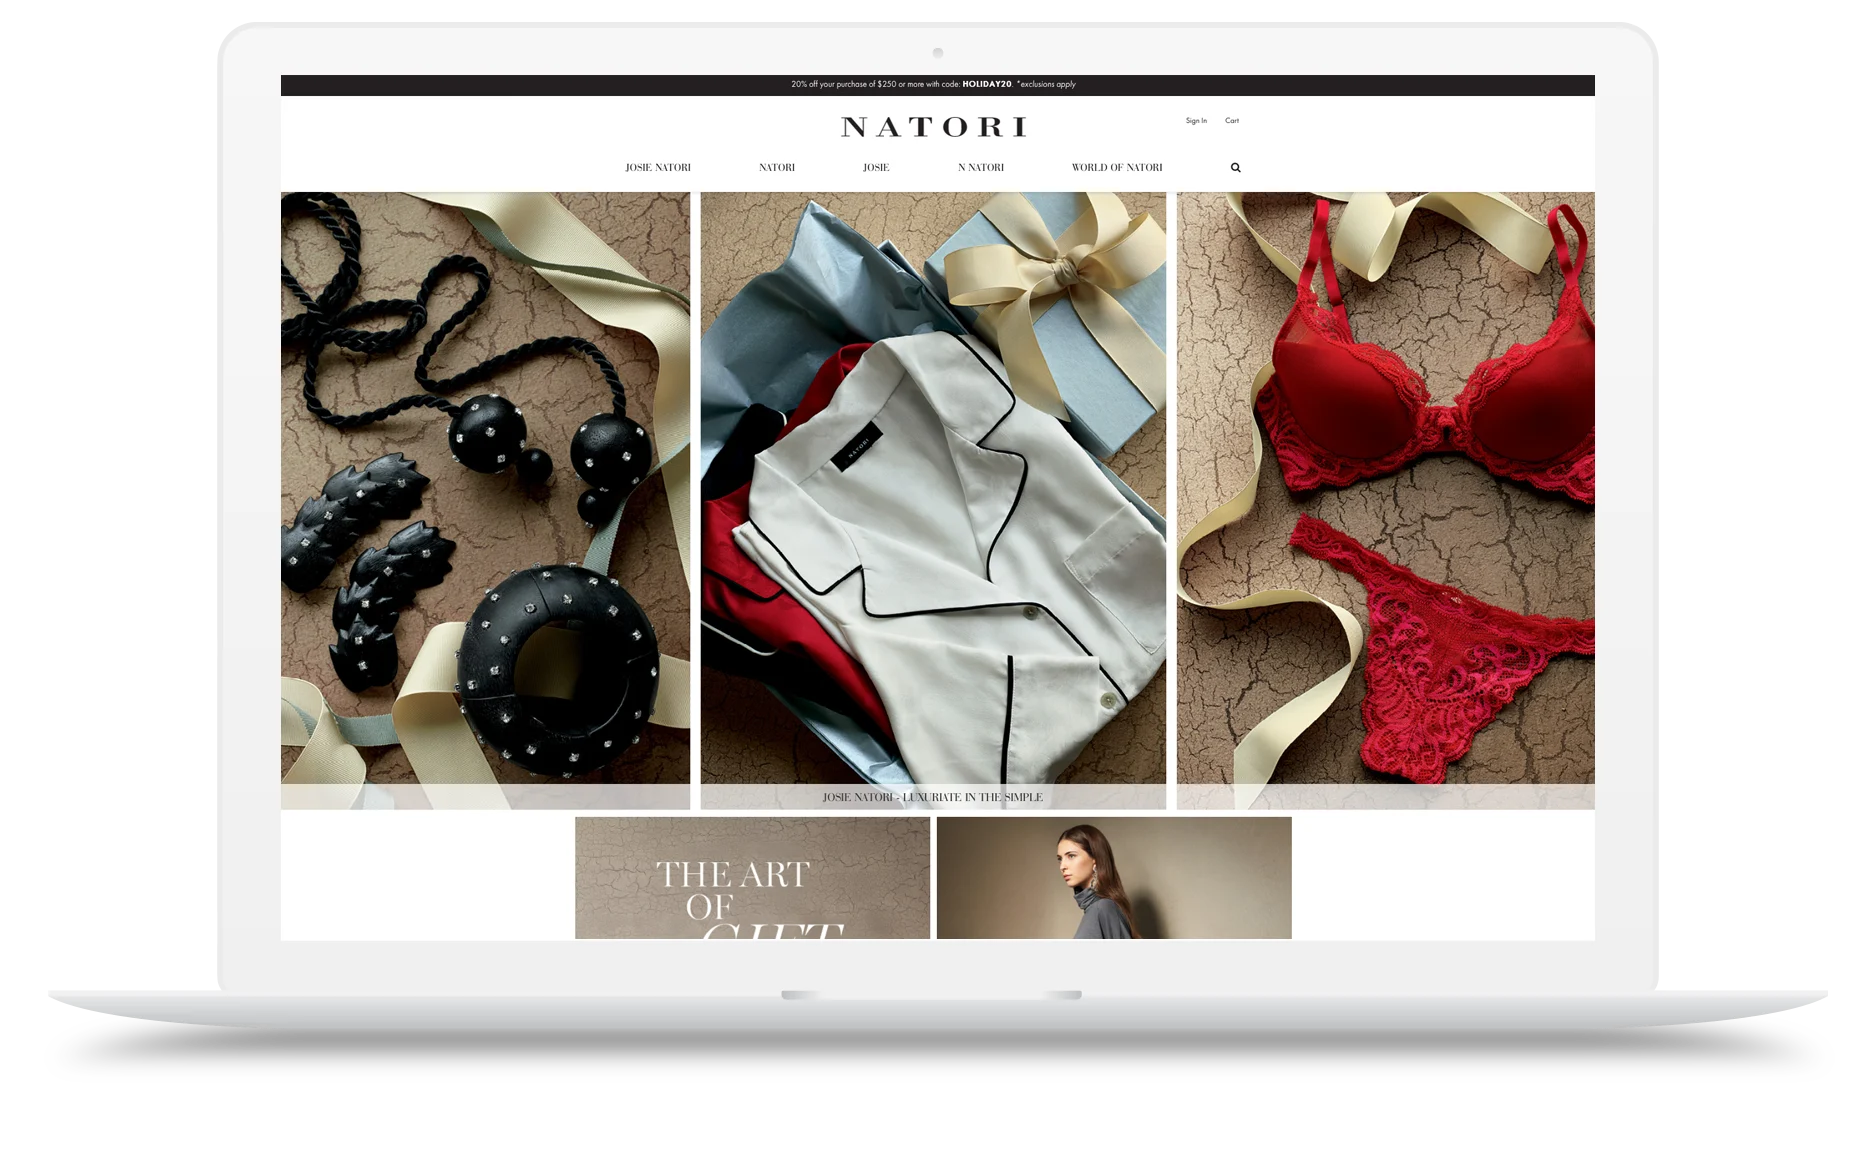 Iconic Fashion Brand Natori Launches New Look and Online Store